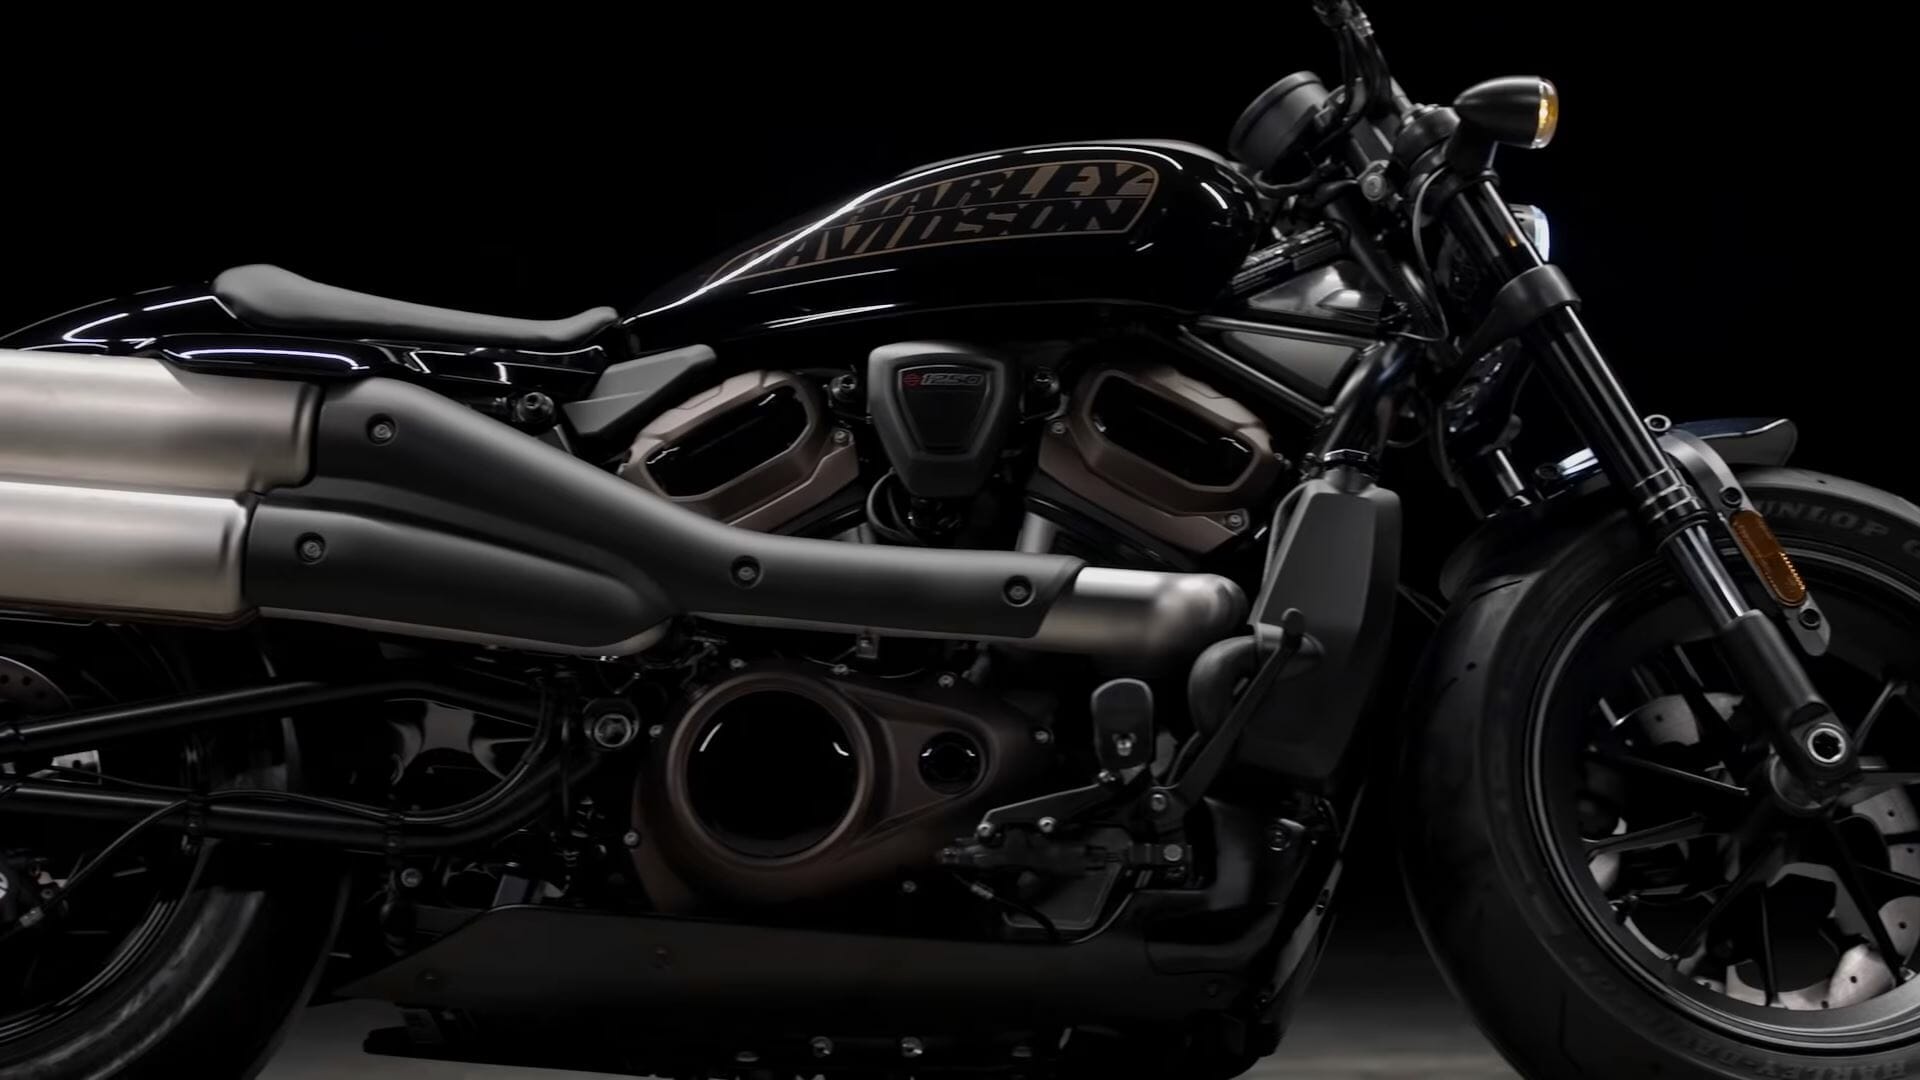 Harley shows upcoming 1250 Custom in Pan America video
- also in the MOTORCYCLES.NEWS APP